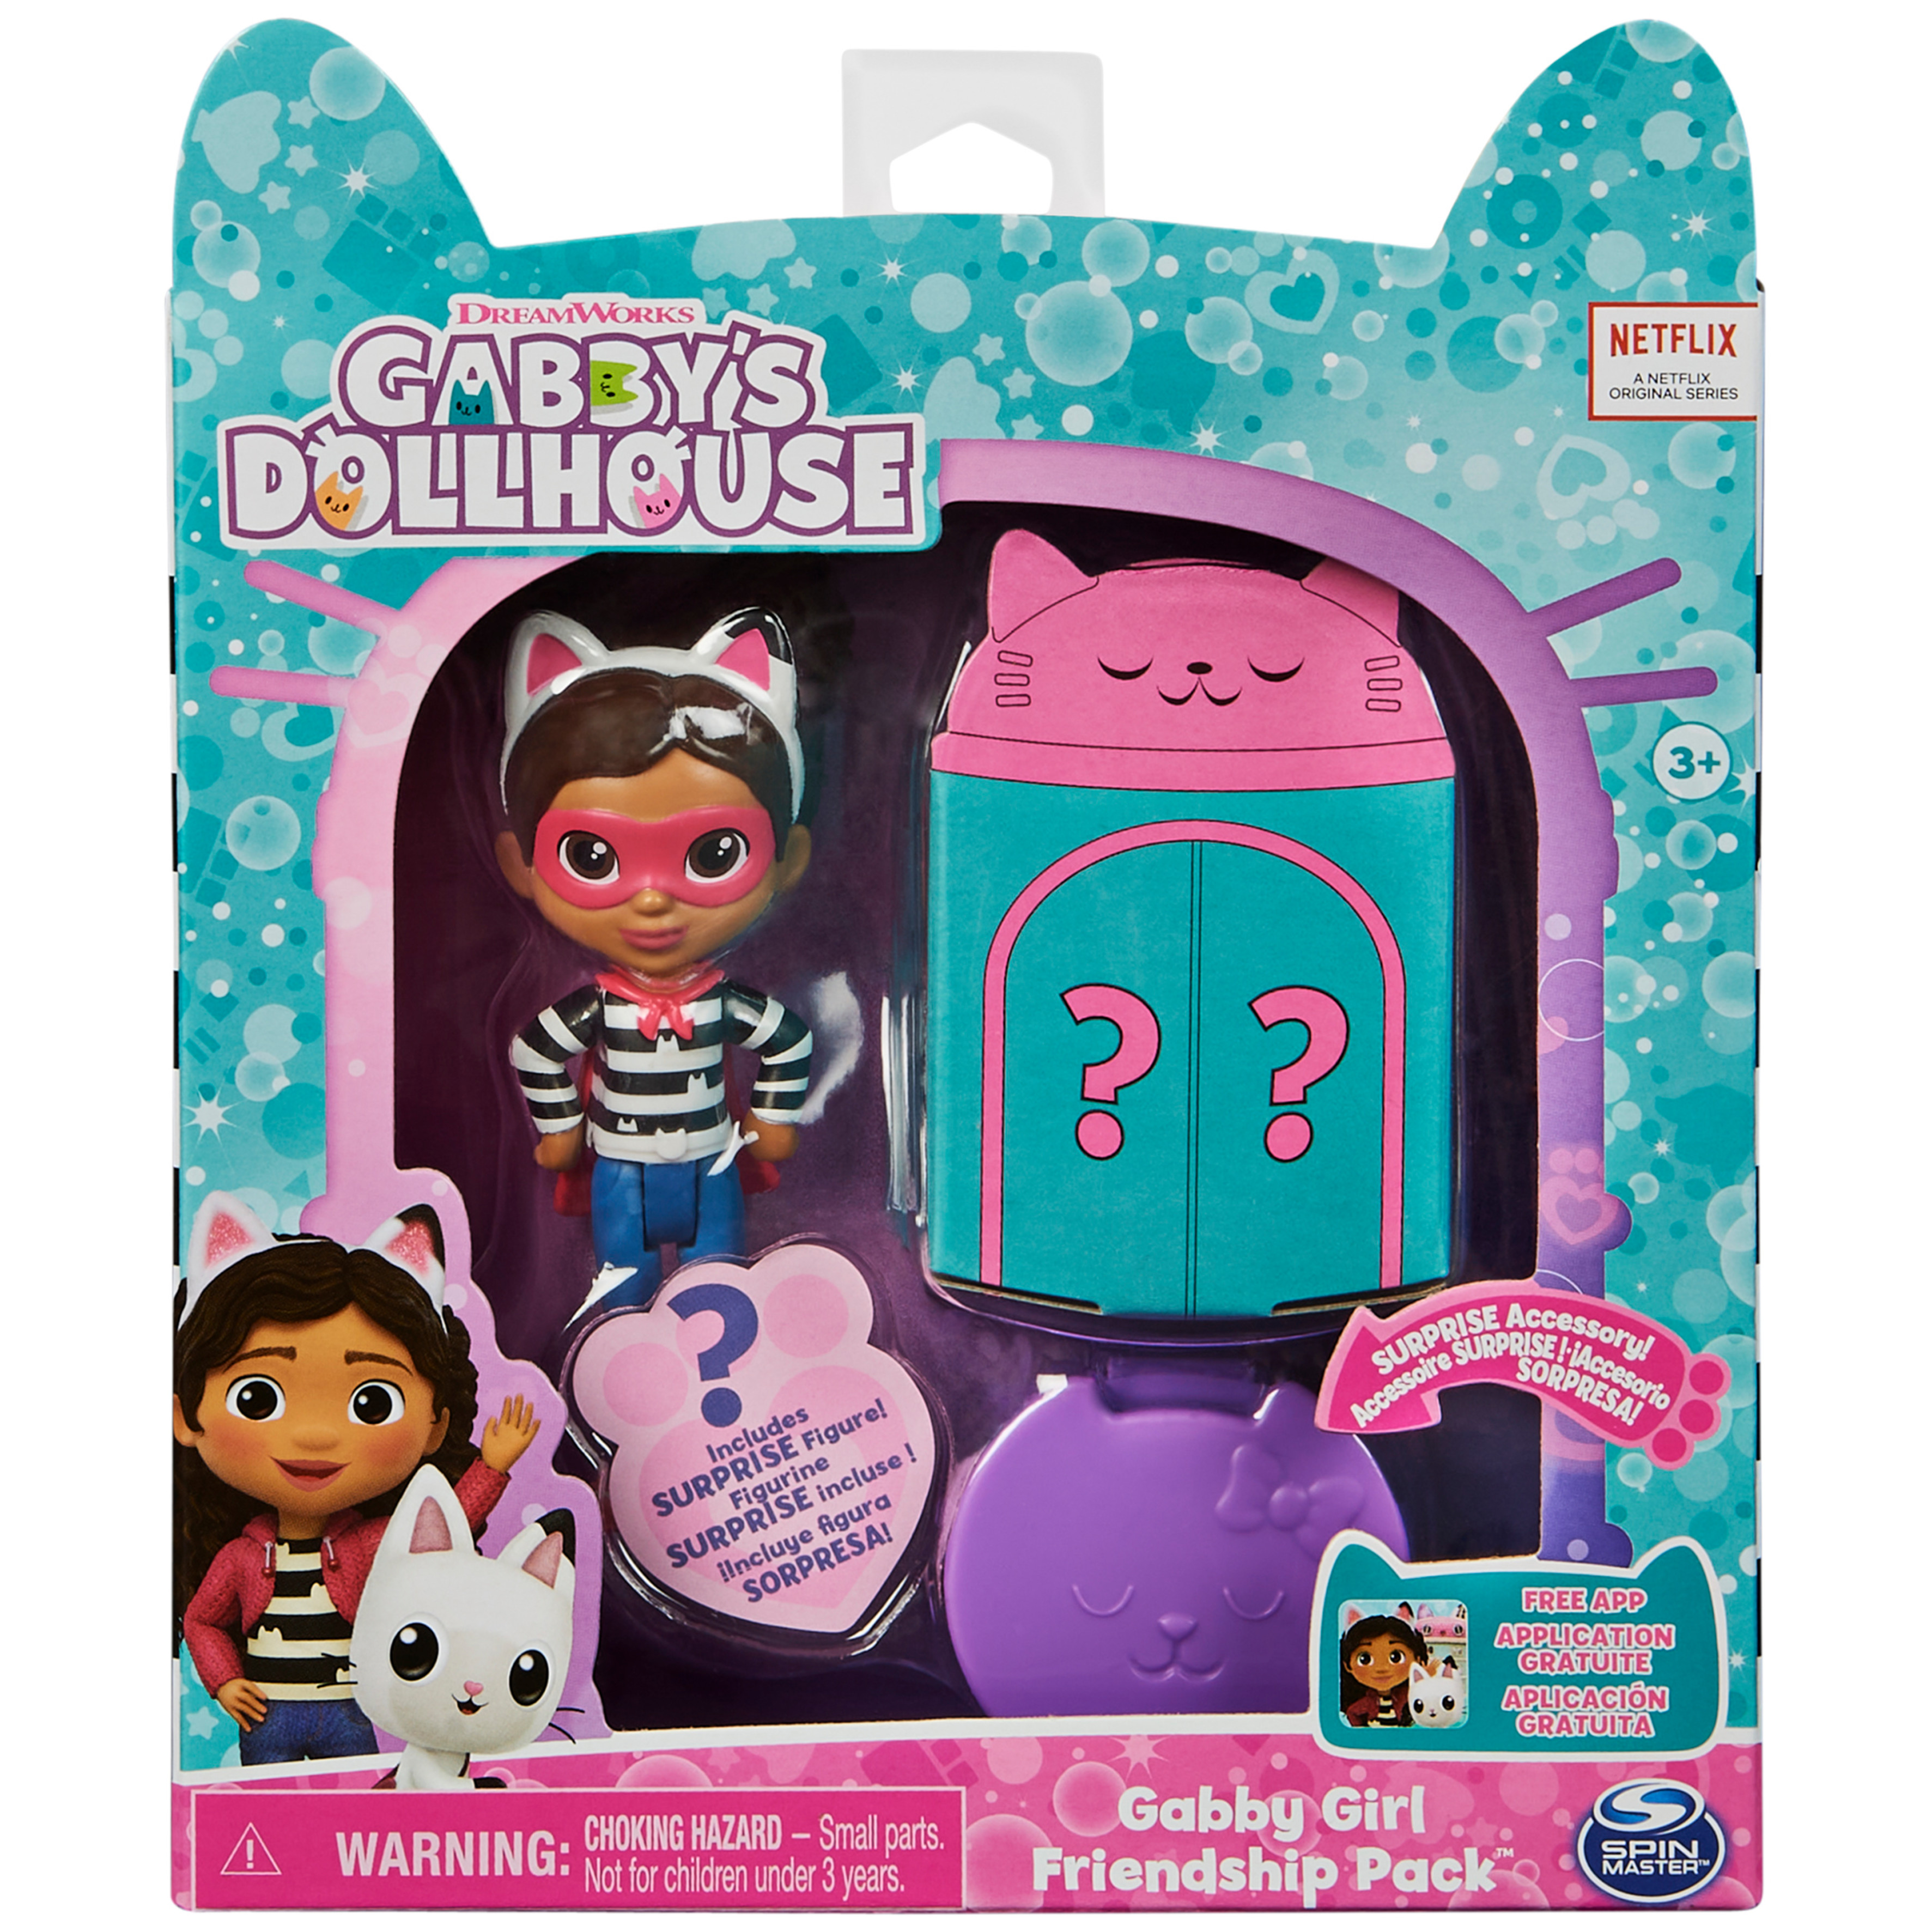 Gabby’s Dollhouse, Friendship Pack with Gabby Girl - image 2 of 6